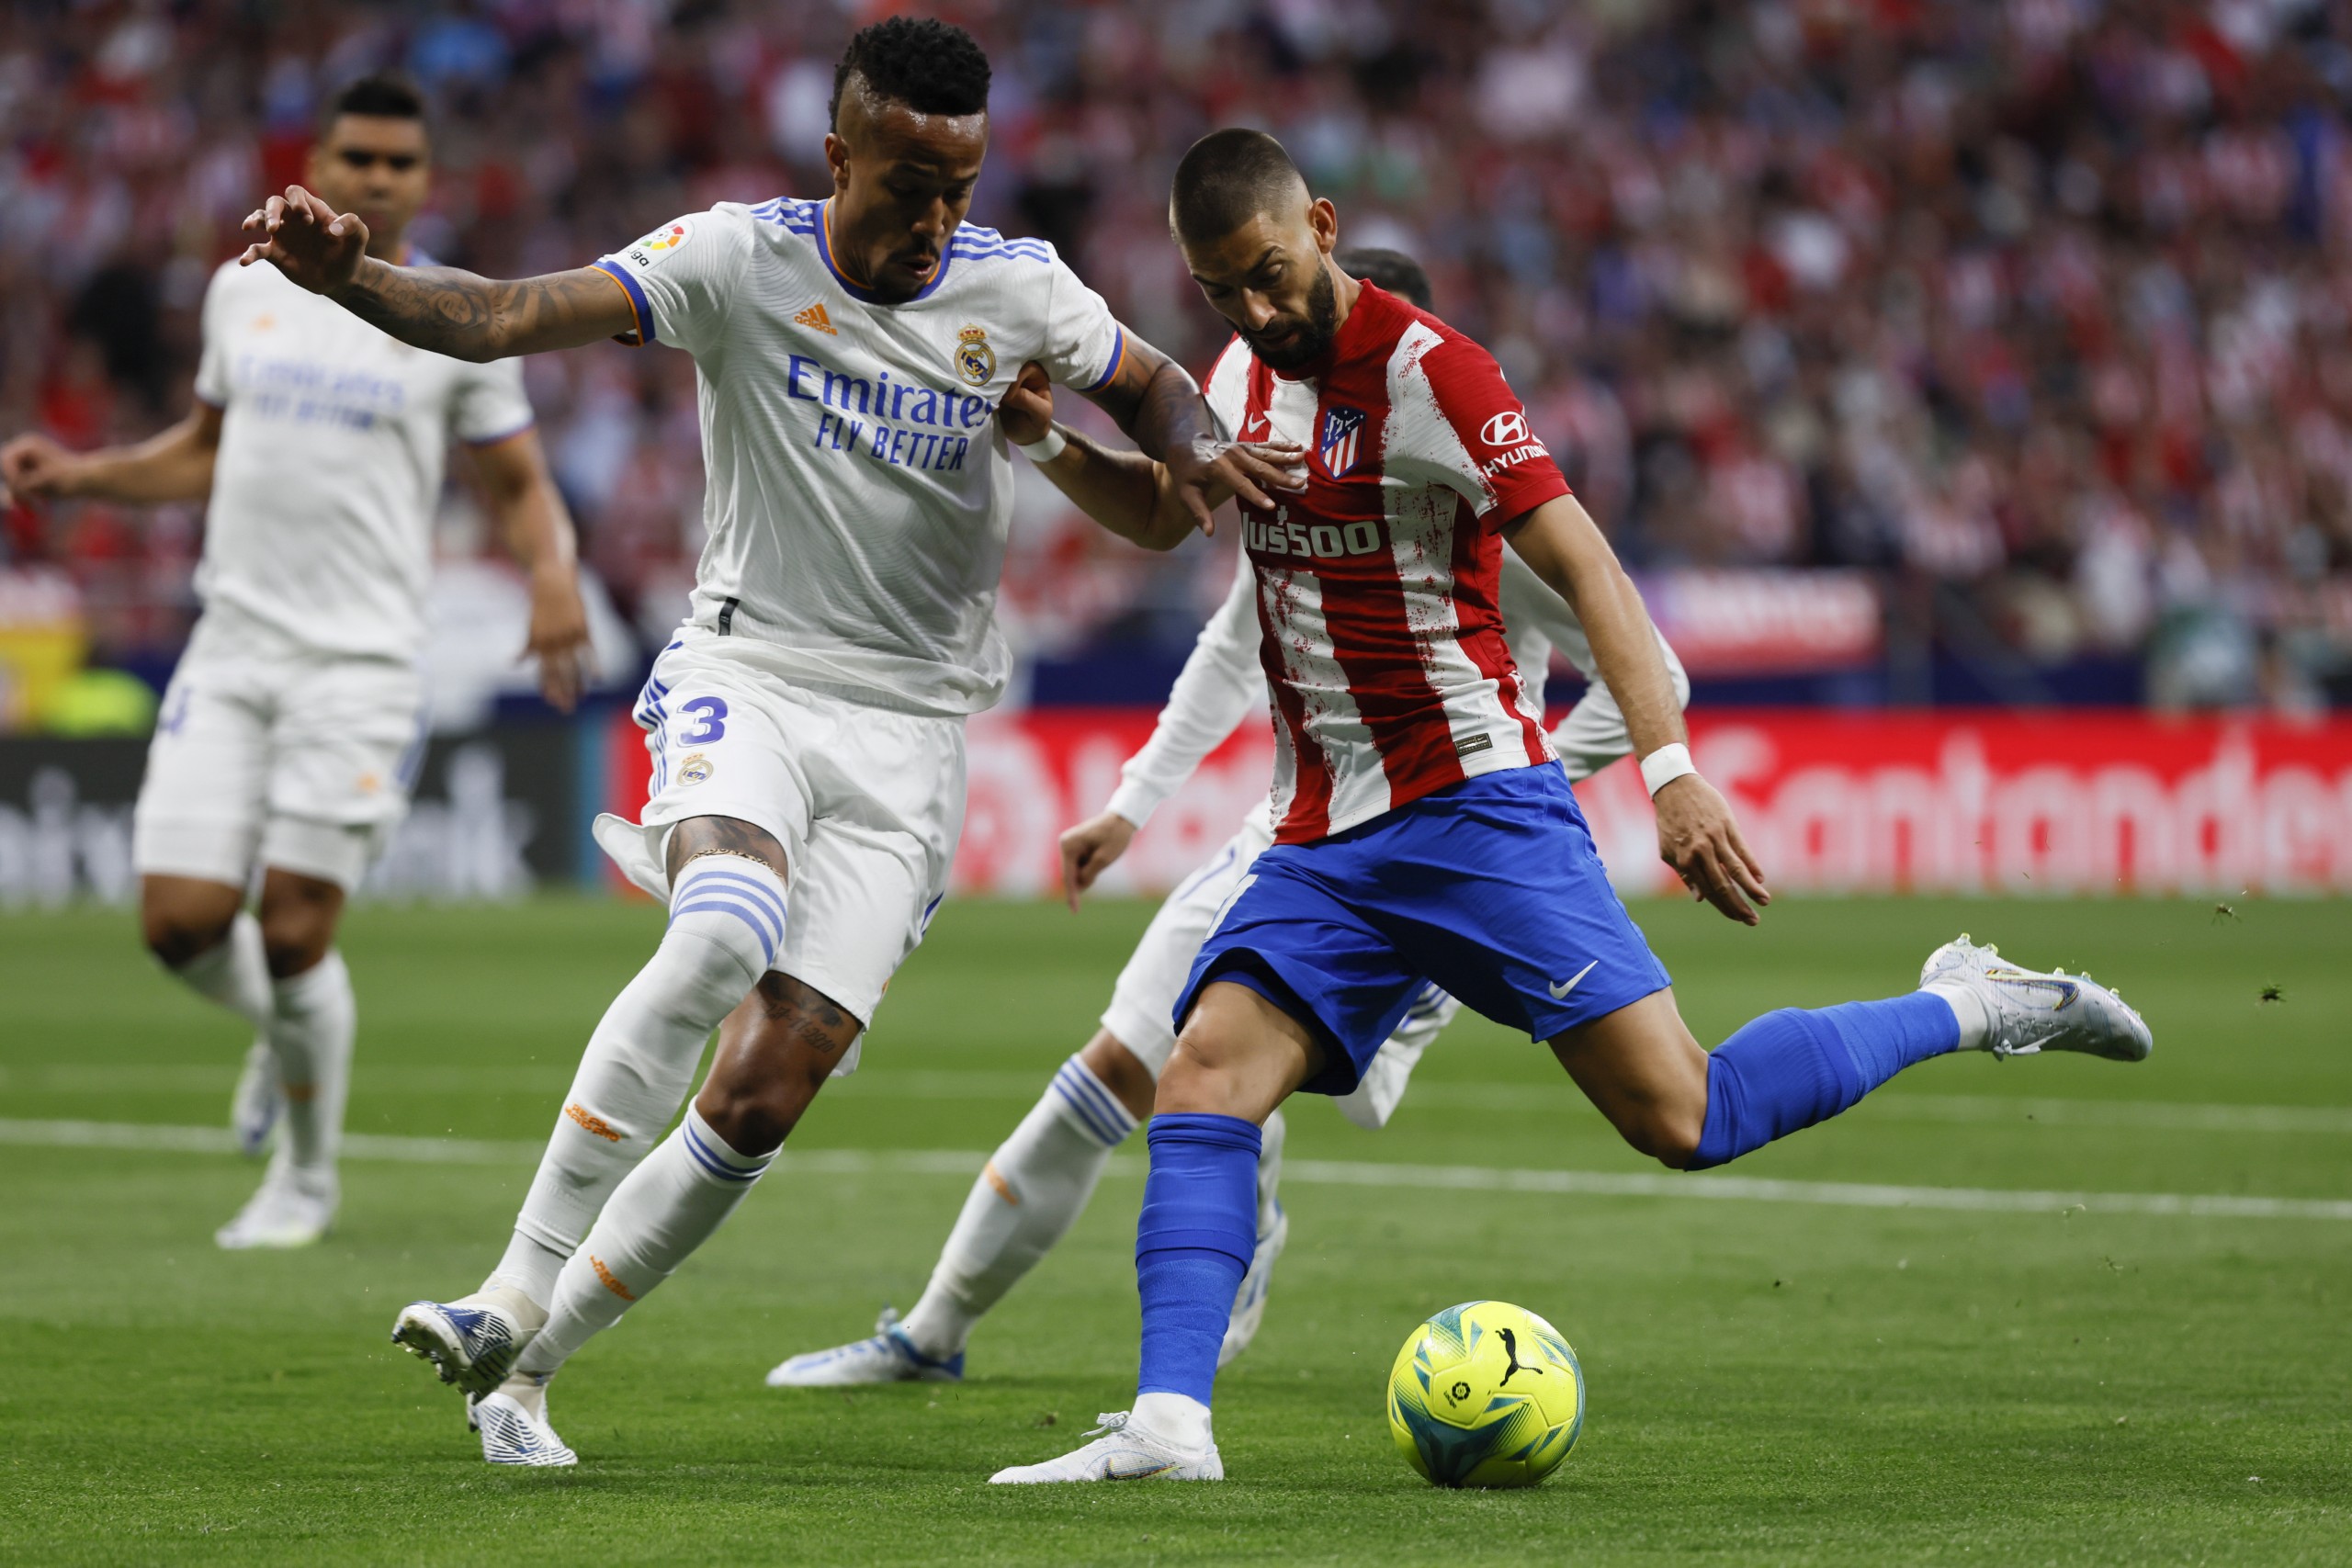 epa09934521 Atletico Madrid's Yannick Carrasco (R) in action against Real Madrid's Eder Militao (L) during a Spanish LaLiga soccer match between Atletico Madrid and Real Madrid at Wanda Metropolitano stadium in Madrid, Spain, 08 May 2022.  EPA/BALLESTEROS